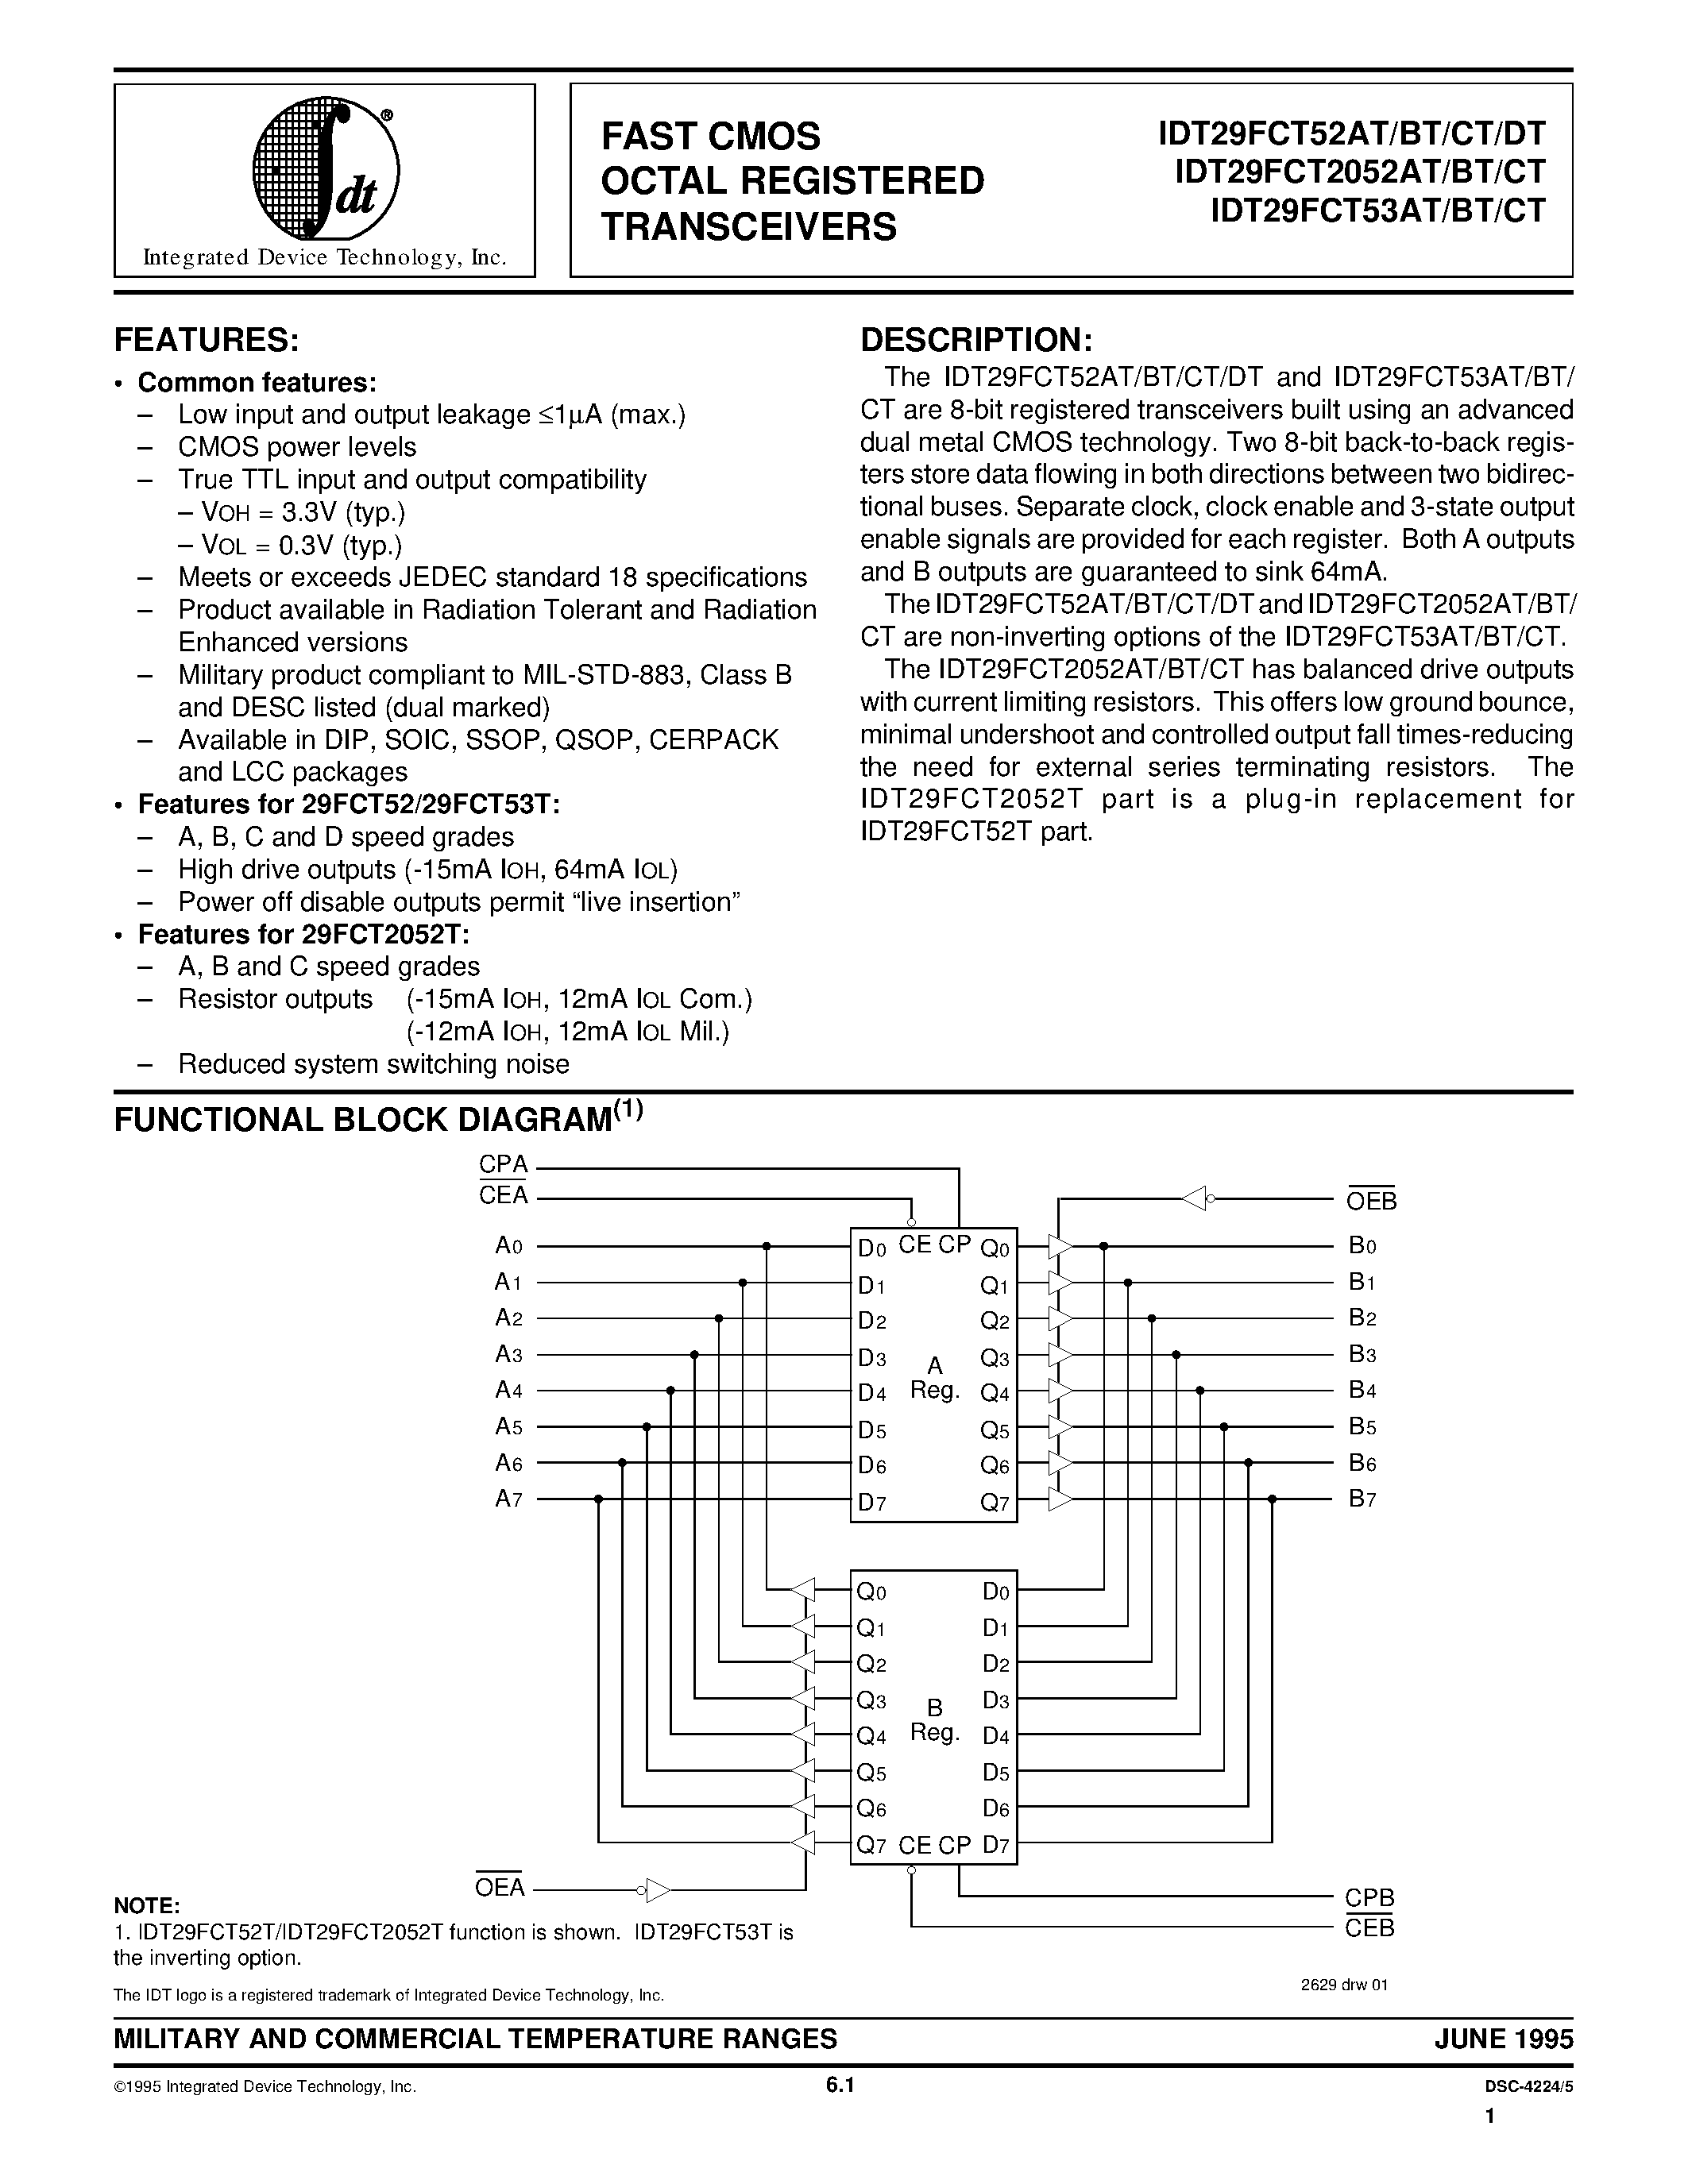 Datasheet 7429FCT53DTPY - FAST CMOS OCTAL REGISTERED TRANSCEIVERS page 1